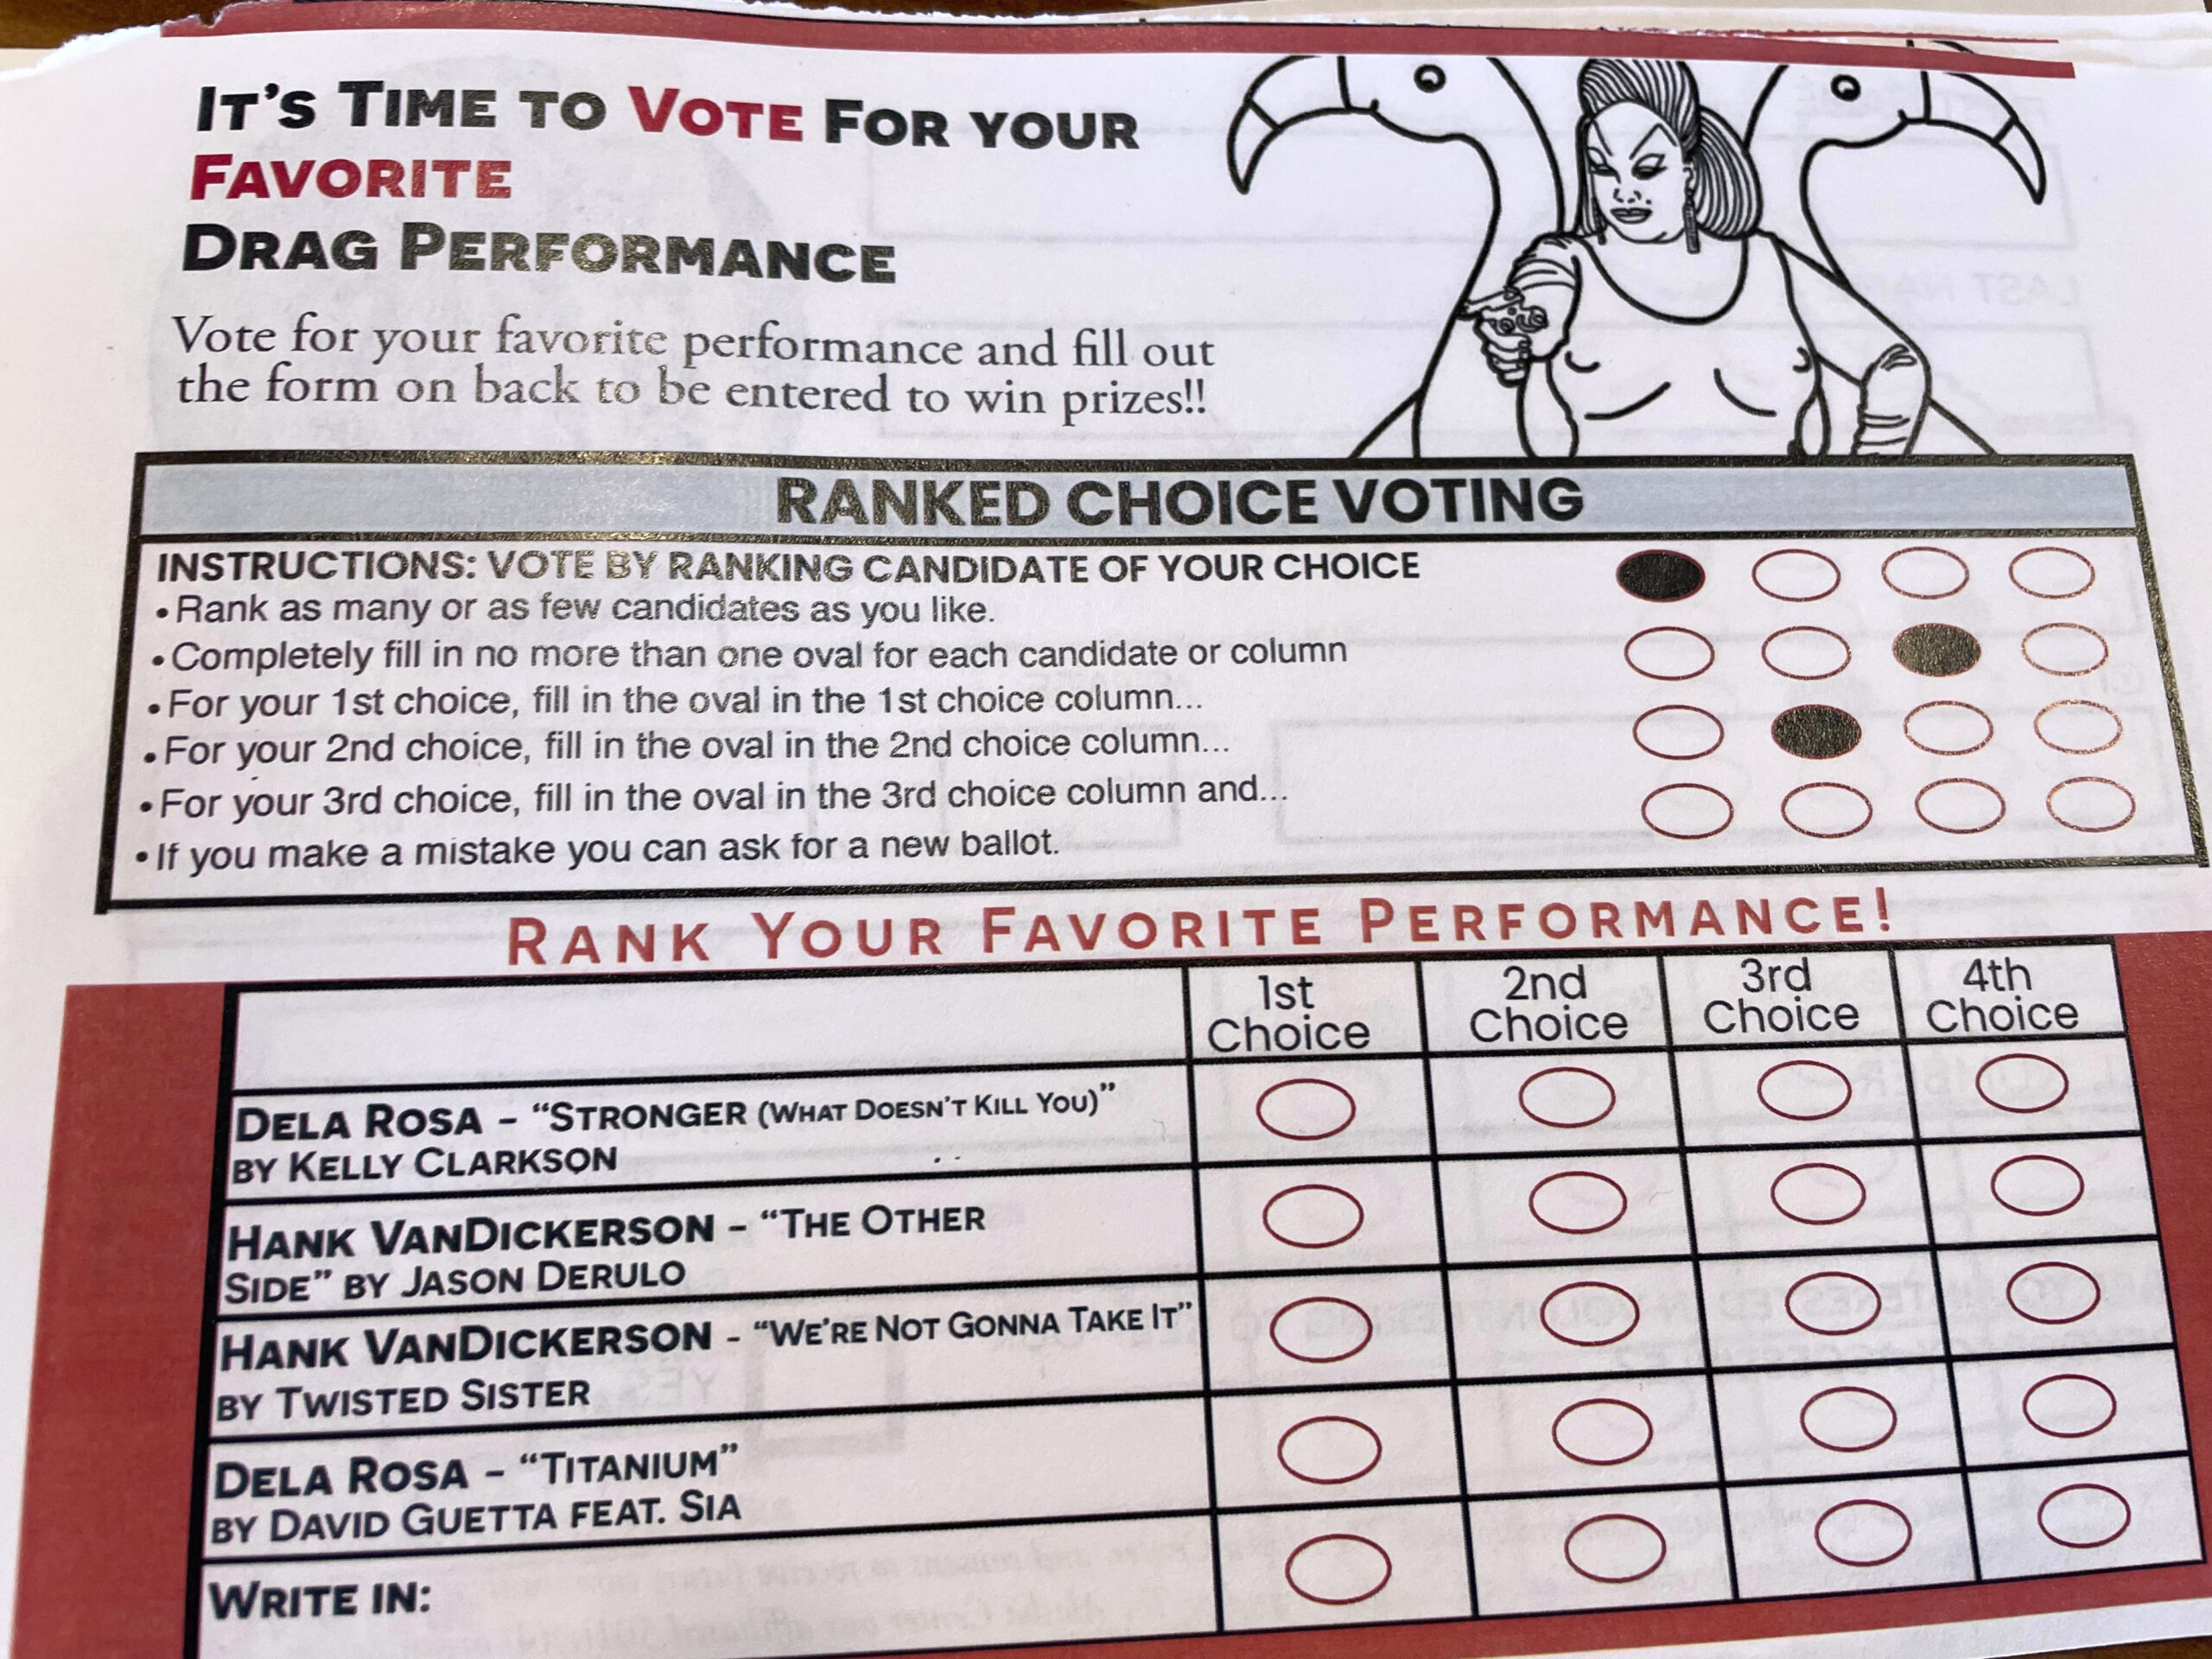 a ranked choice ballot asks people to vote for their favorite drag performance